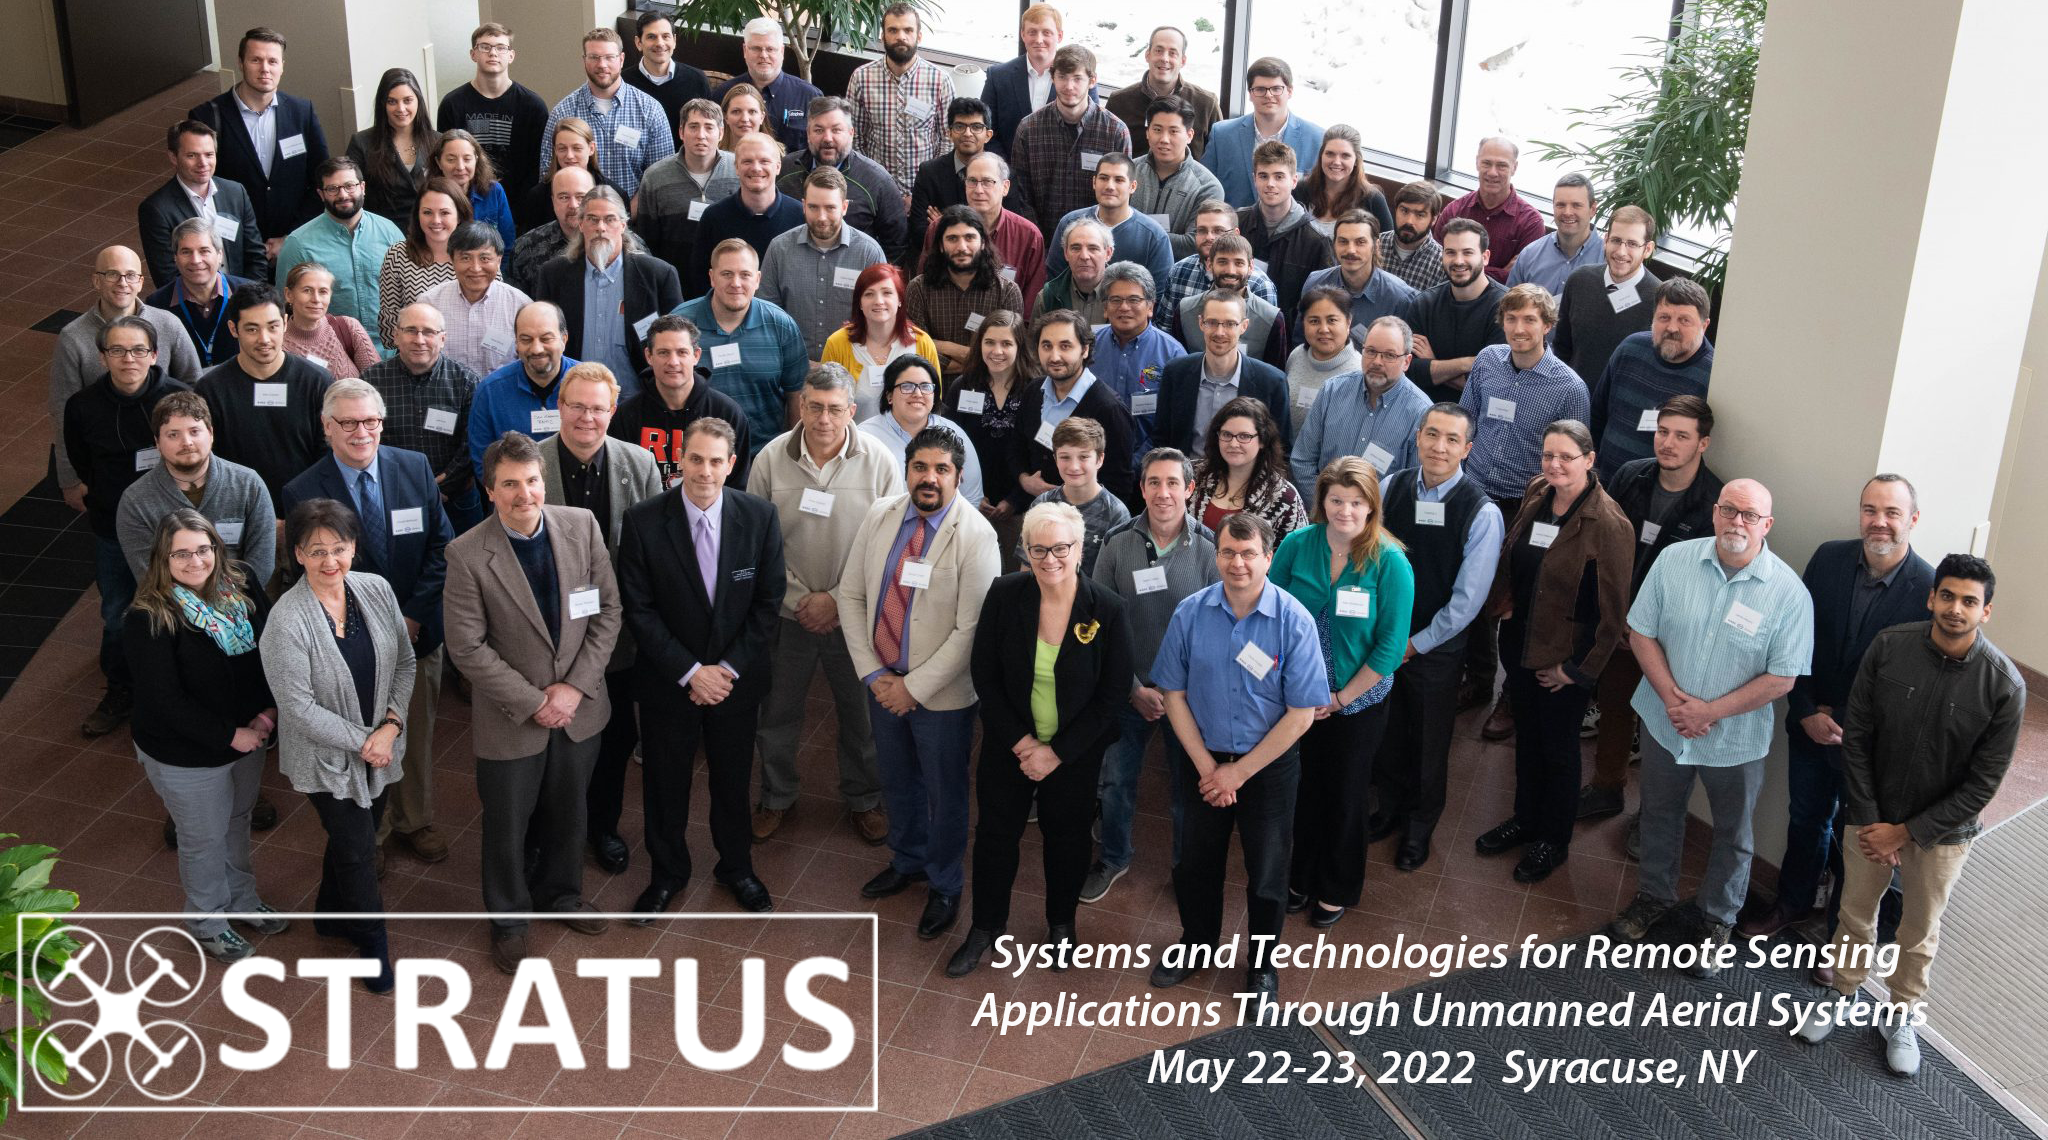 2019 Stratus meeting conference photo